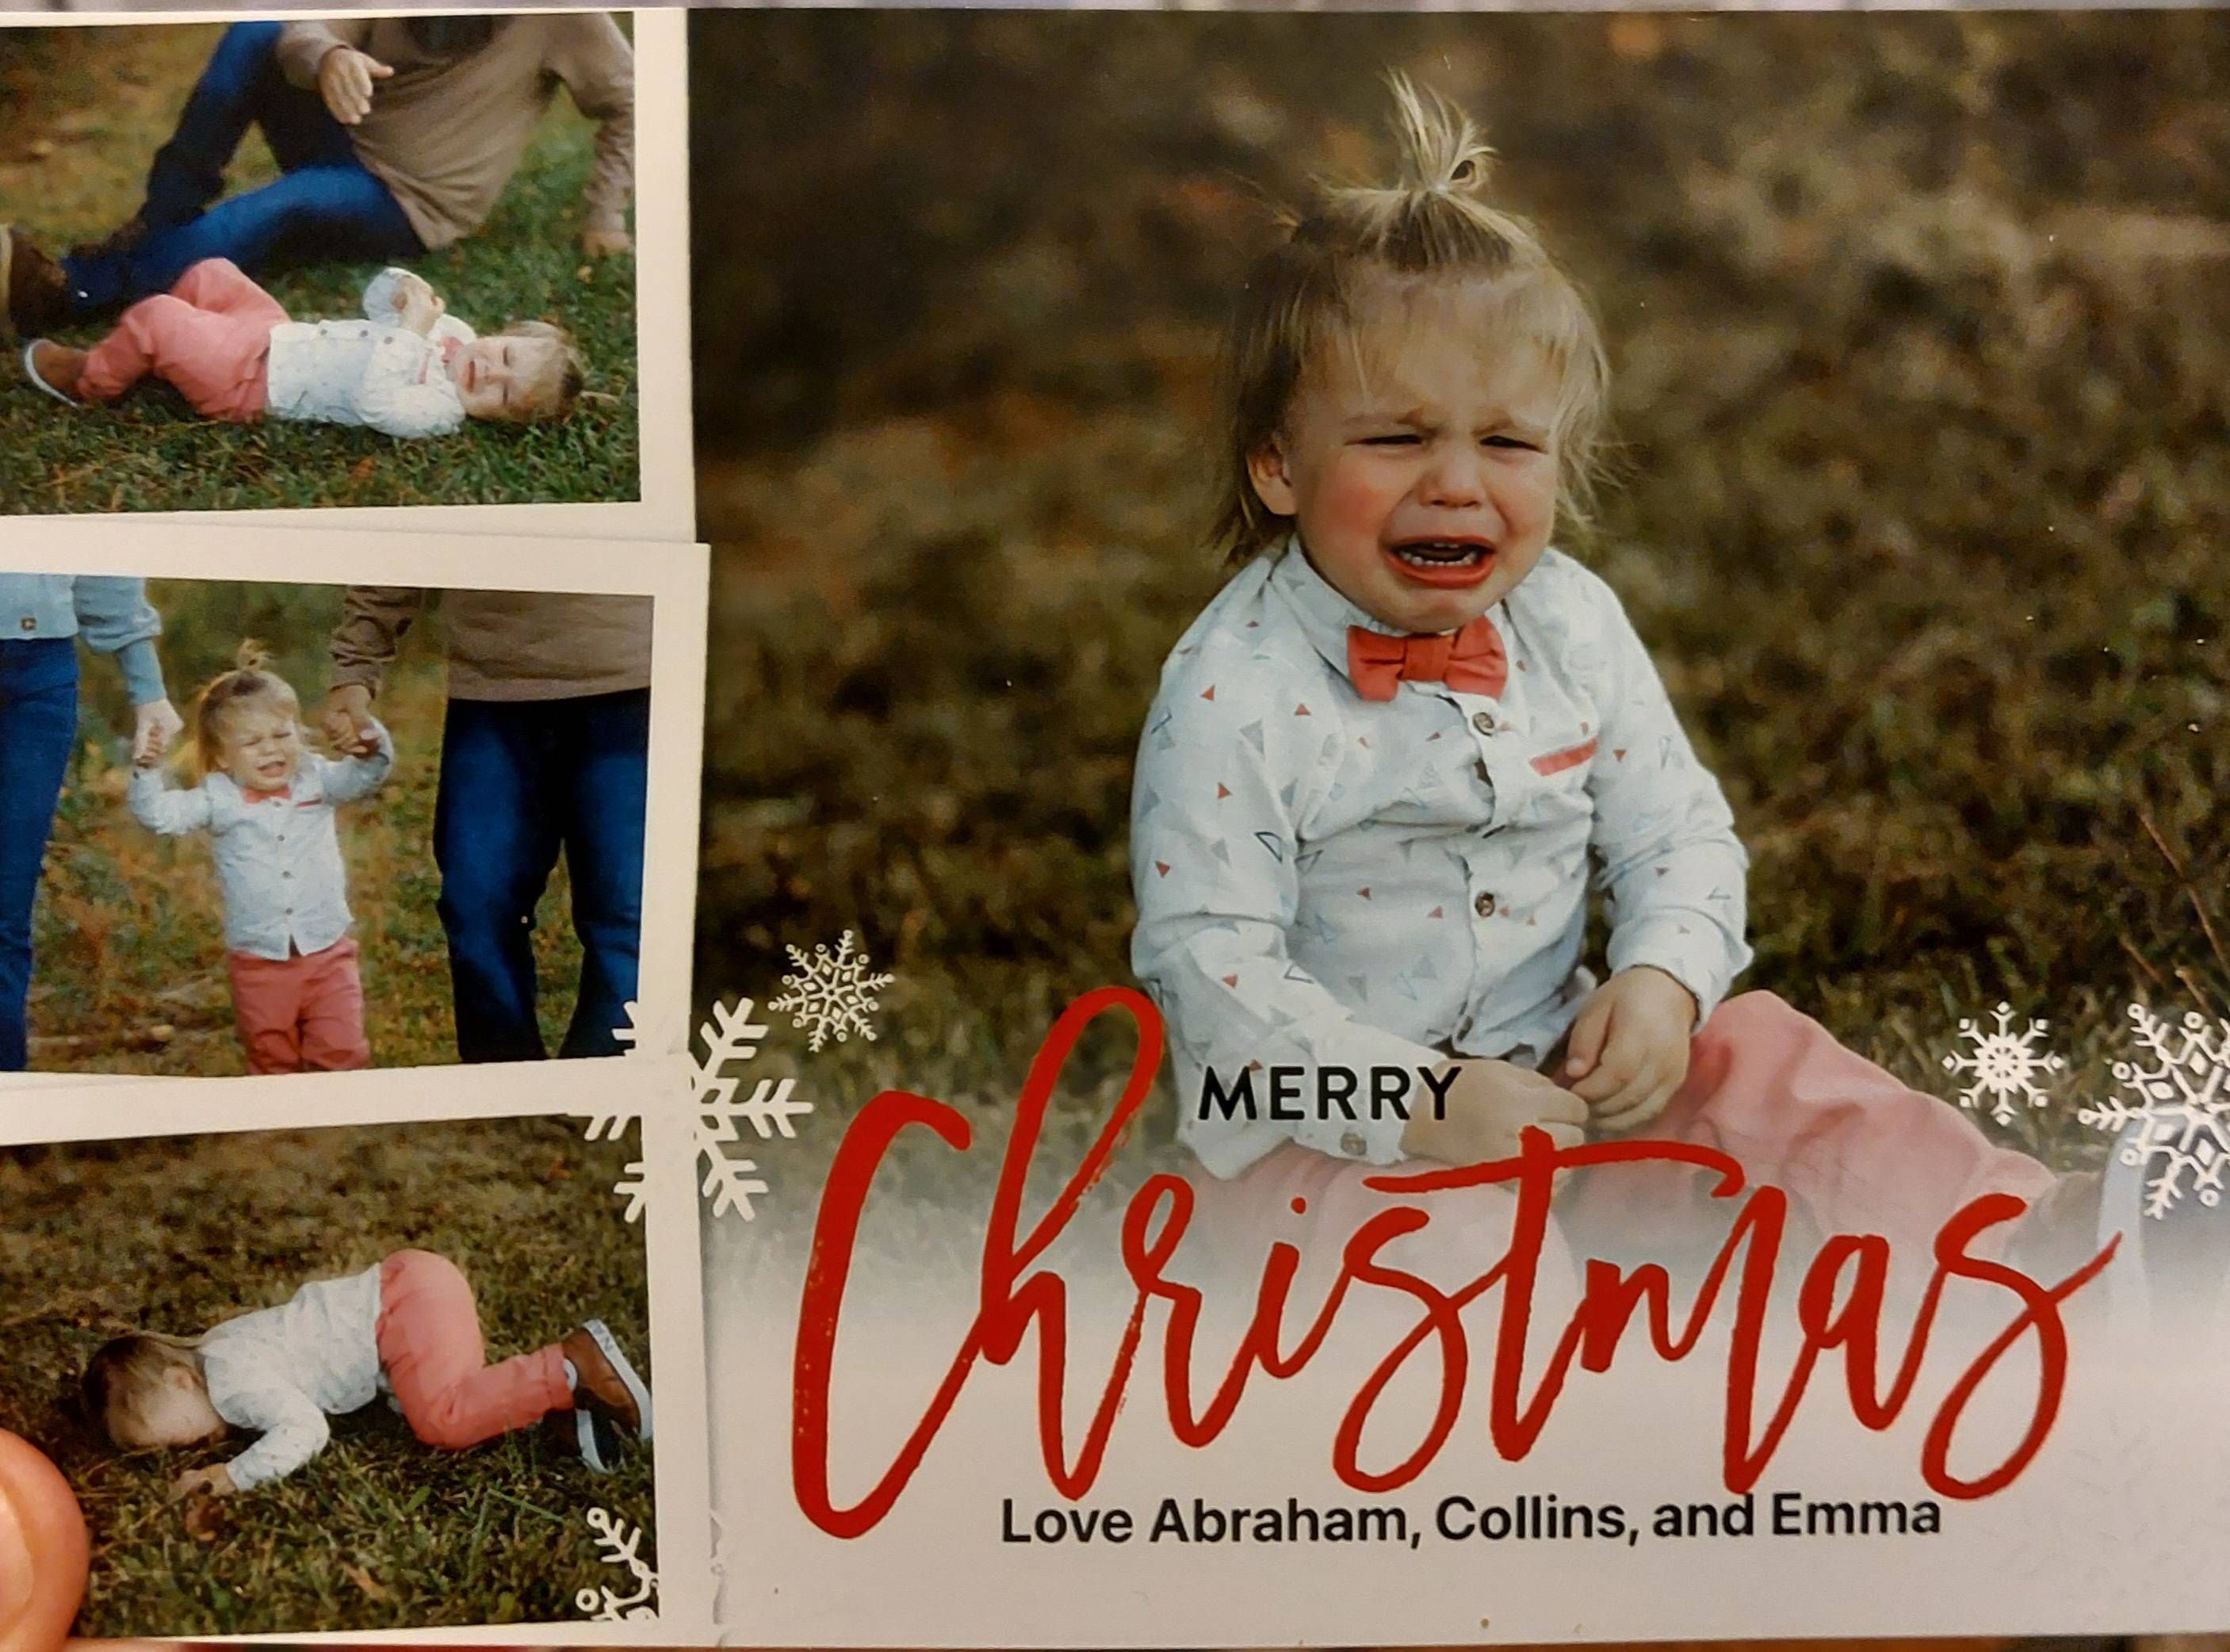 My cousin paid money for a Christmas card photo shoot, but little man wasn't having it that day. Instead of paying more money, she went with what she had. Enjoy!